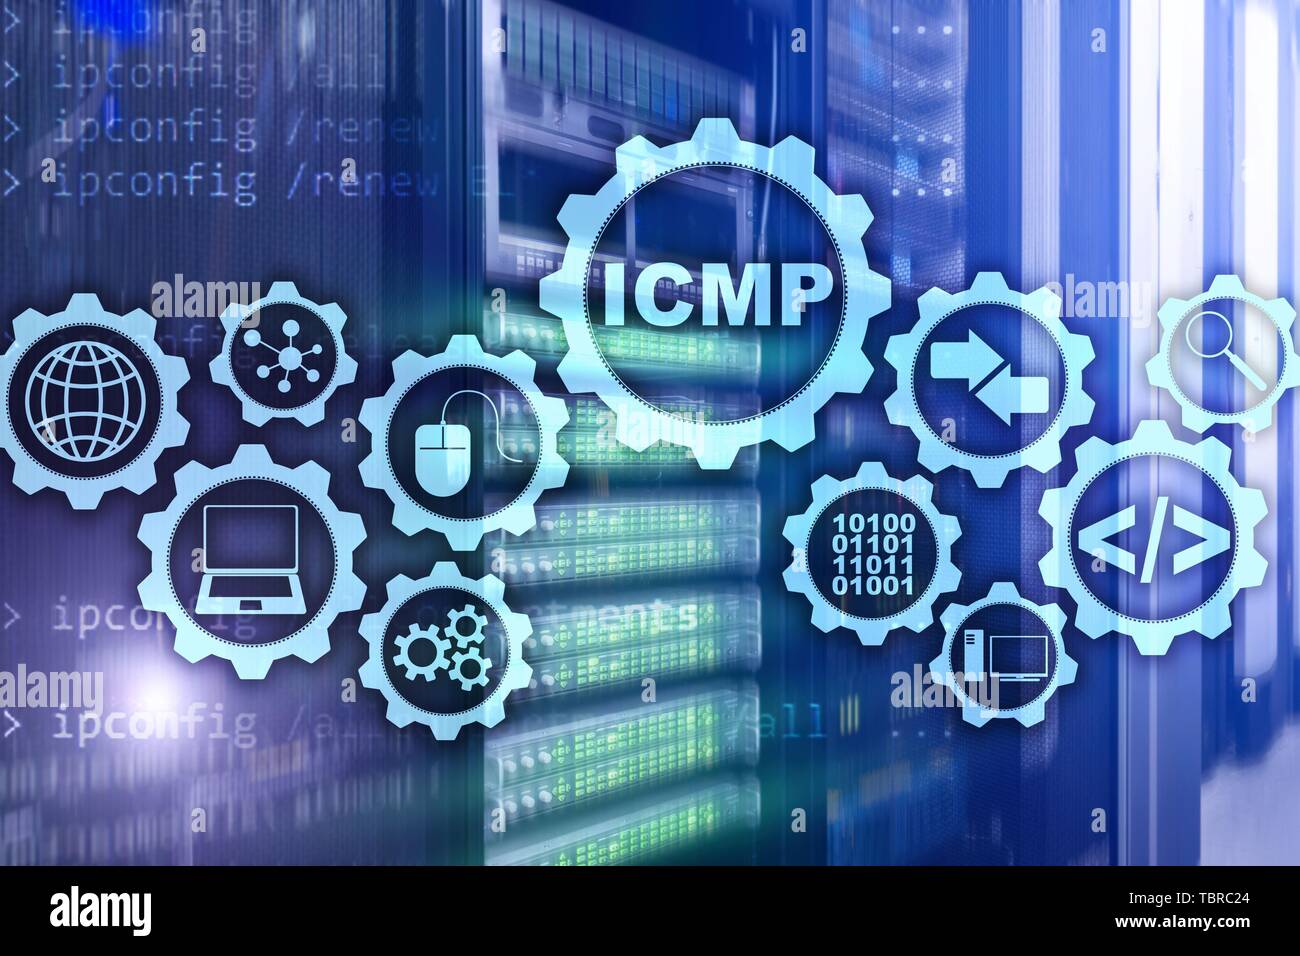 ICMP. Internet Control Message Protocol. Network concept. Server room on background Stock Photo